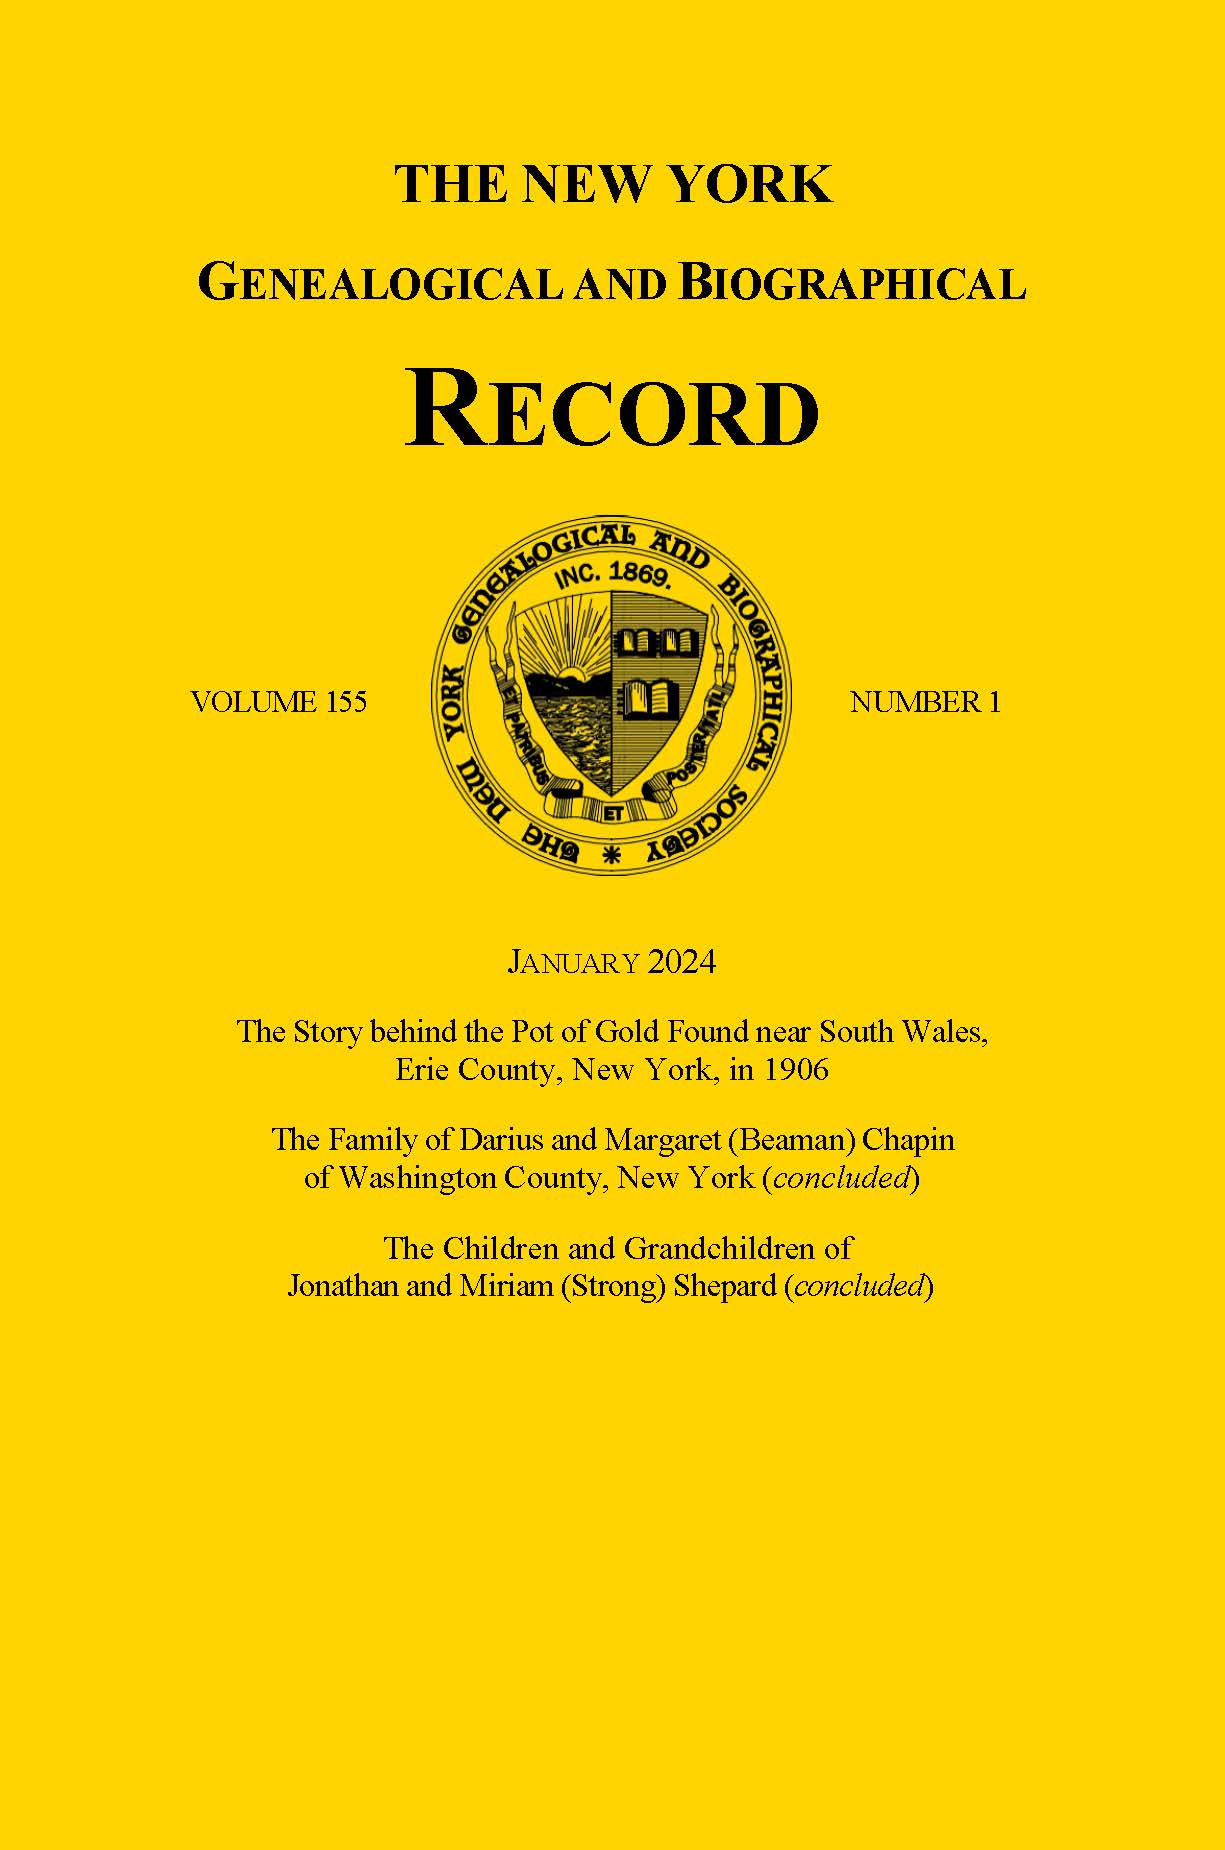 Cover of Jan. 2024 issue of the Record